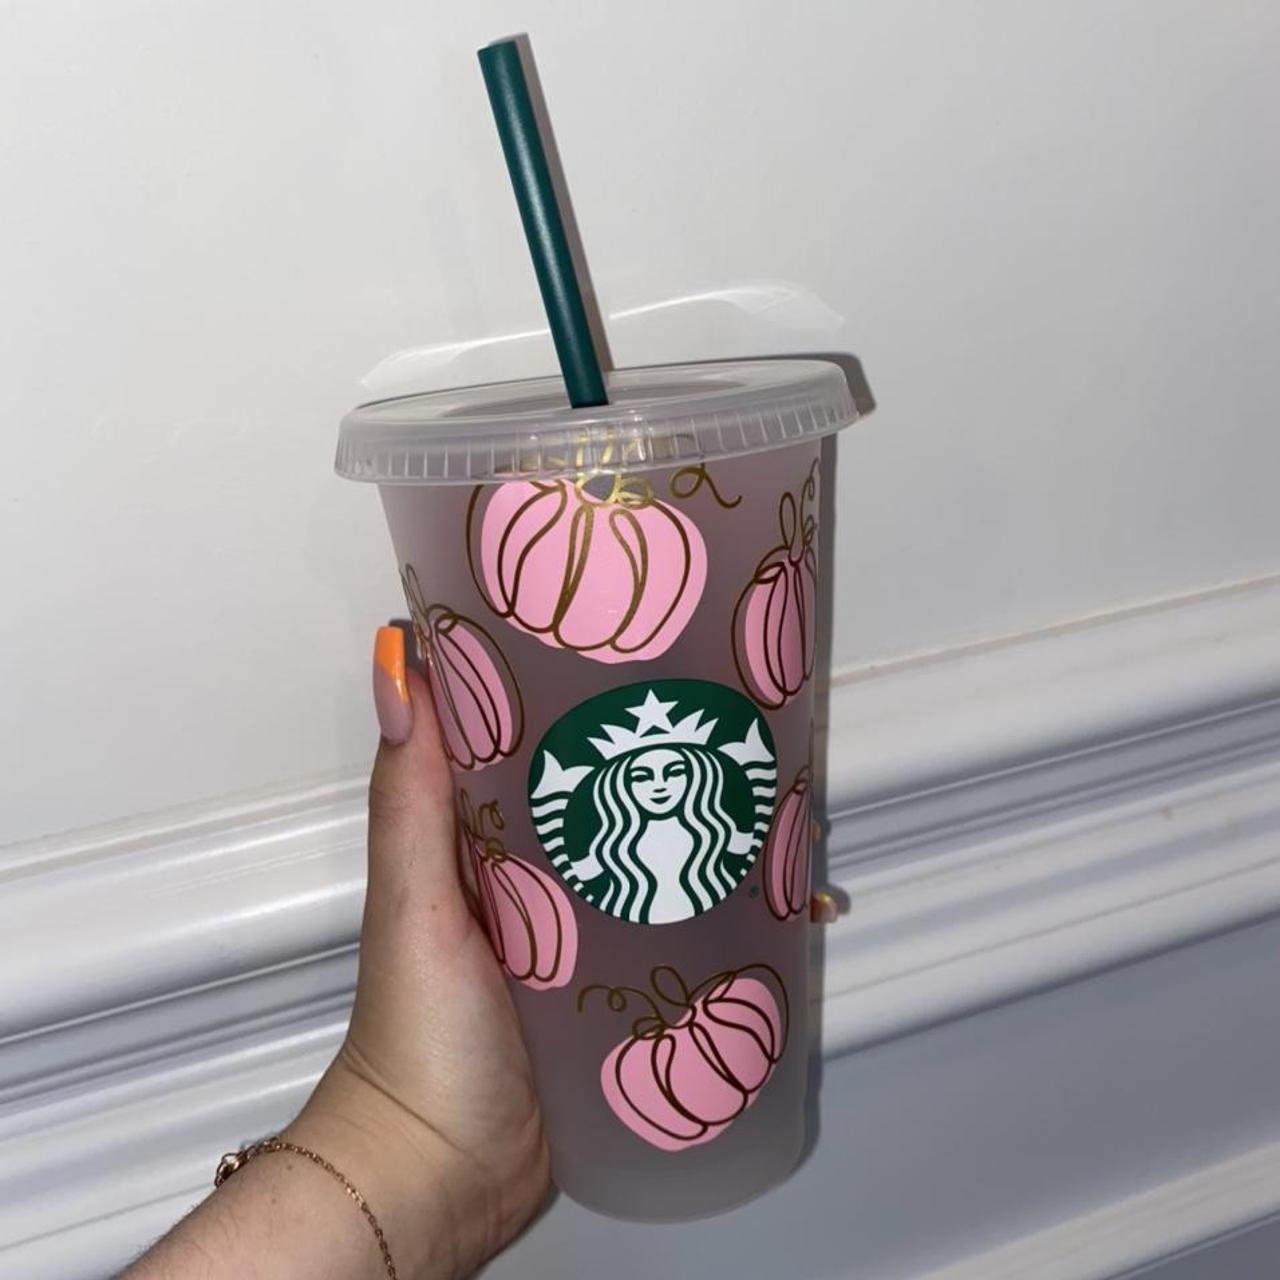 Personalised starbucks cold cup with green straw. - Depop